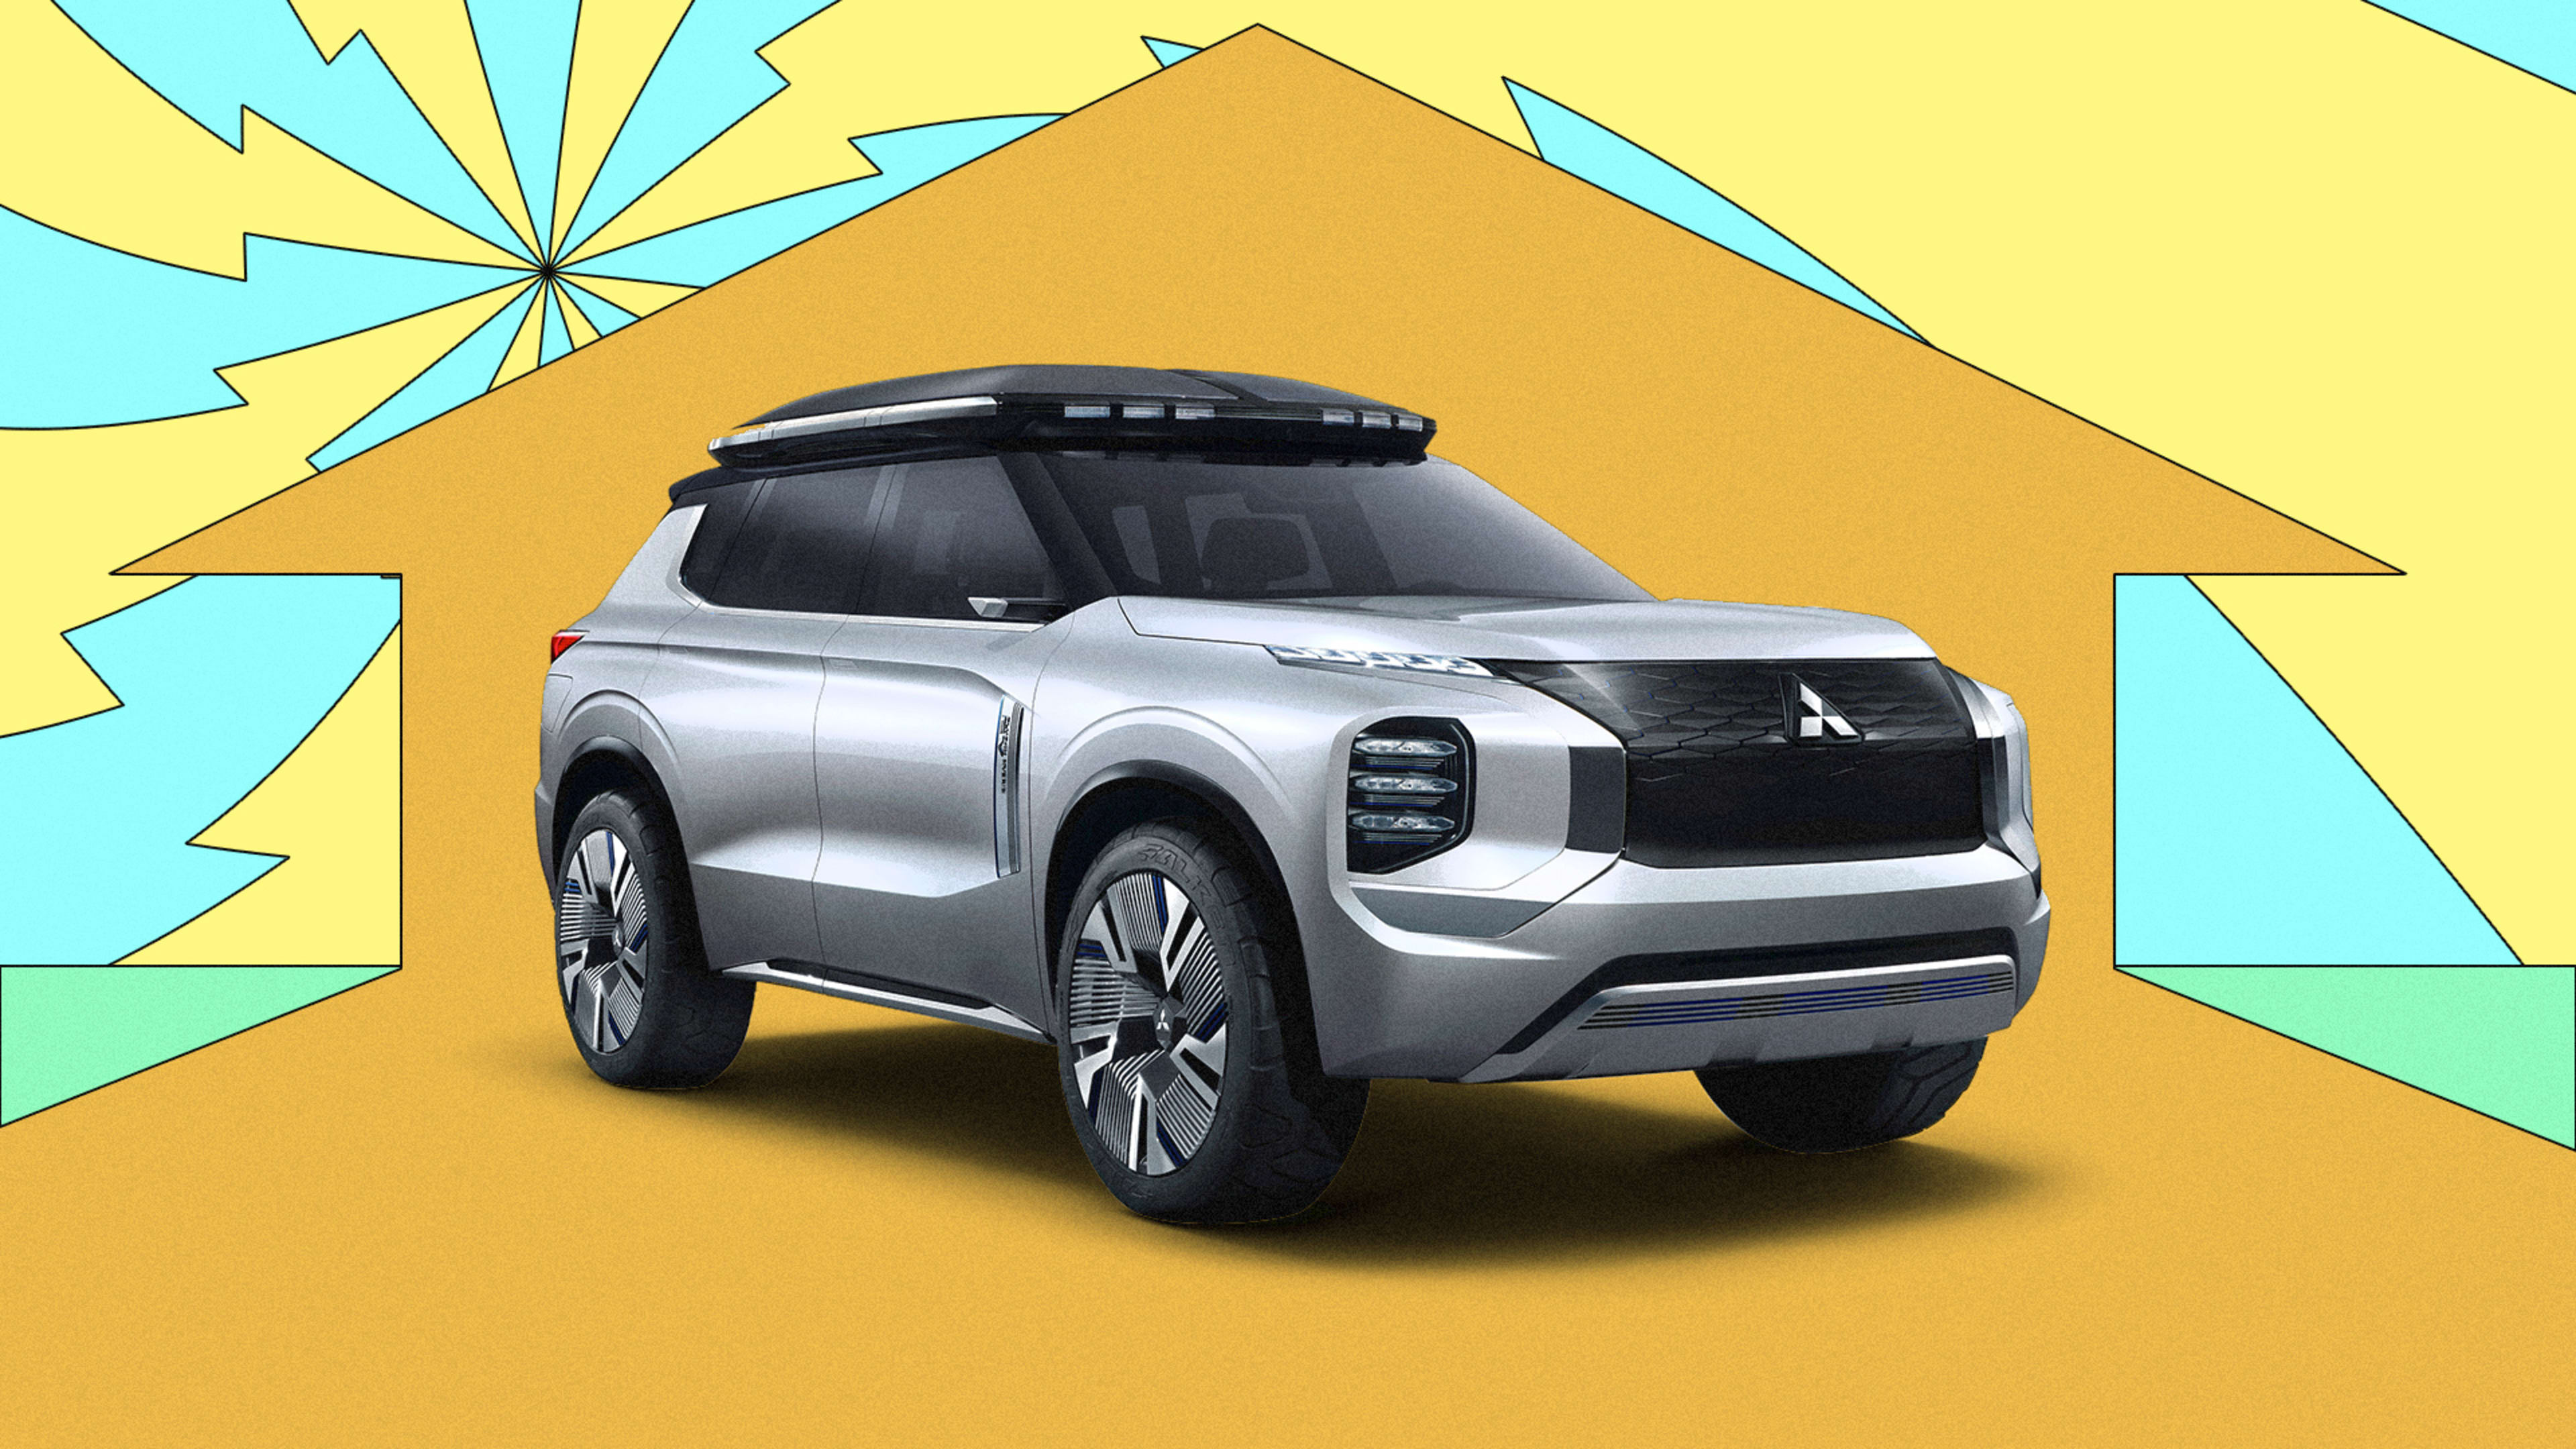 This SUV powers your house–and your house powers this SUV